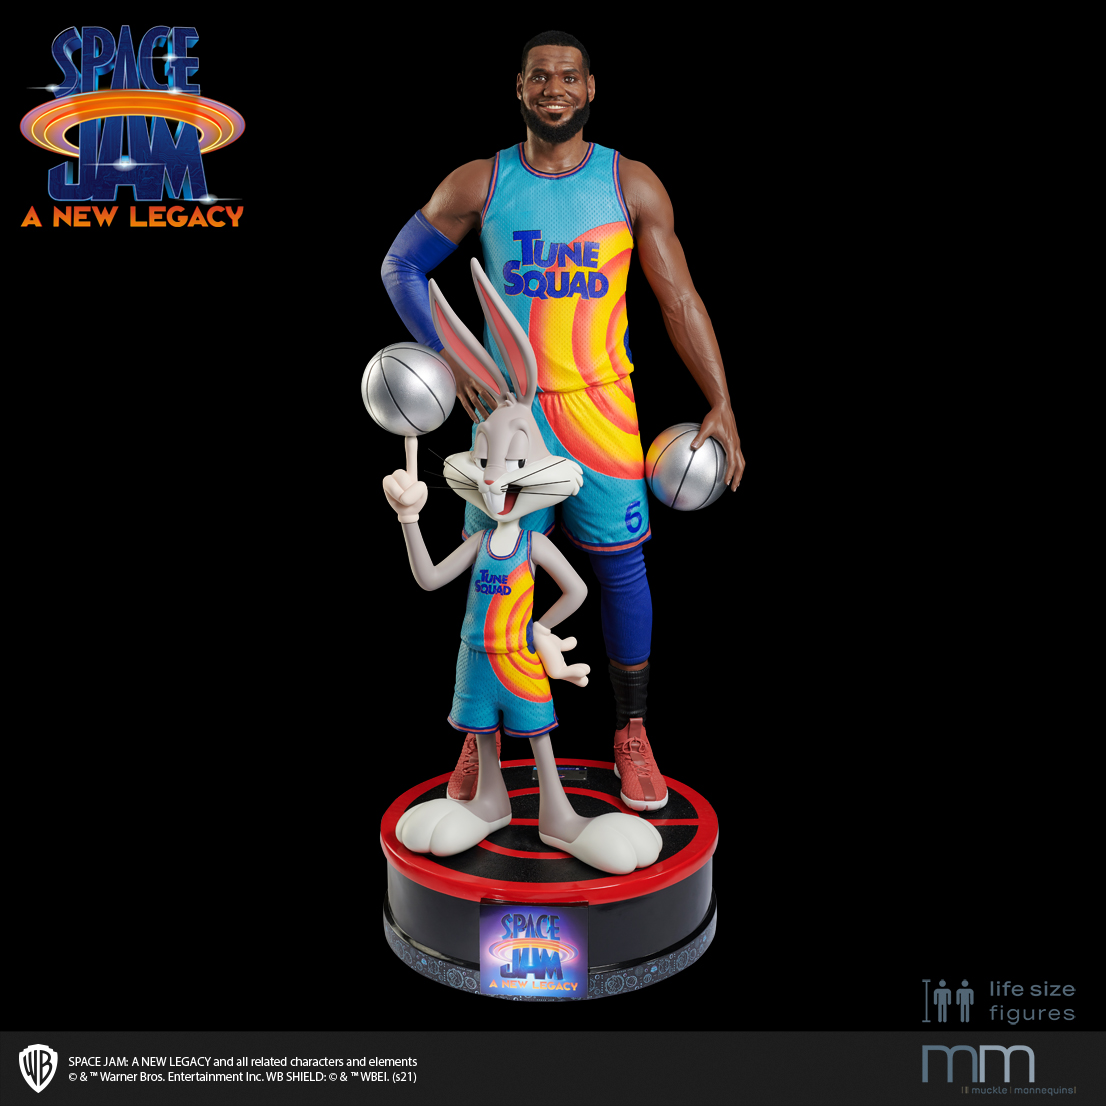 Space Jam Set LeBron James and Bugs Bunny Life-Size Statues Muckle